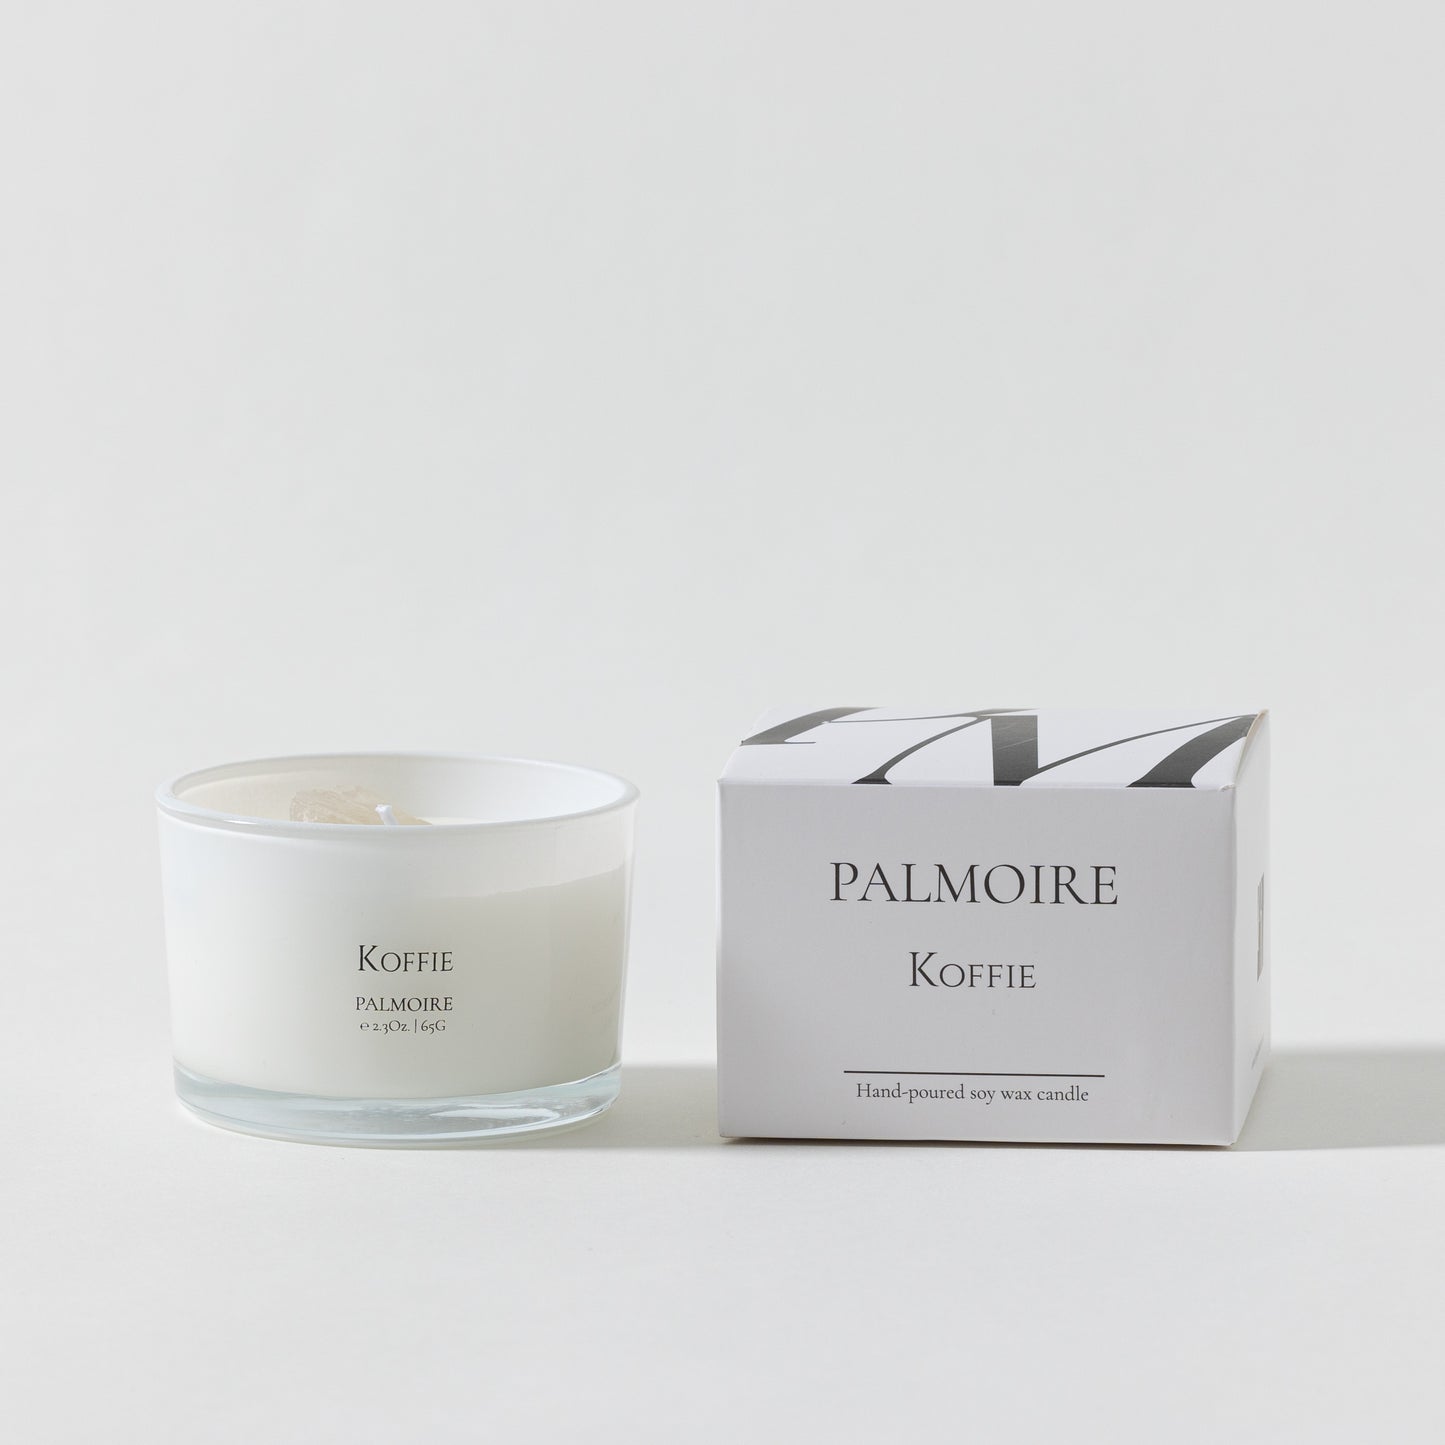 Koffie Soy Wax Candle - PALMOIRE